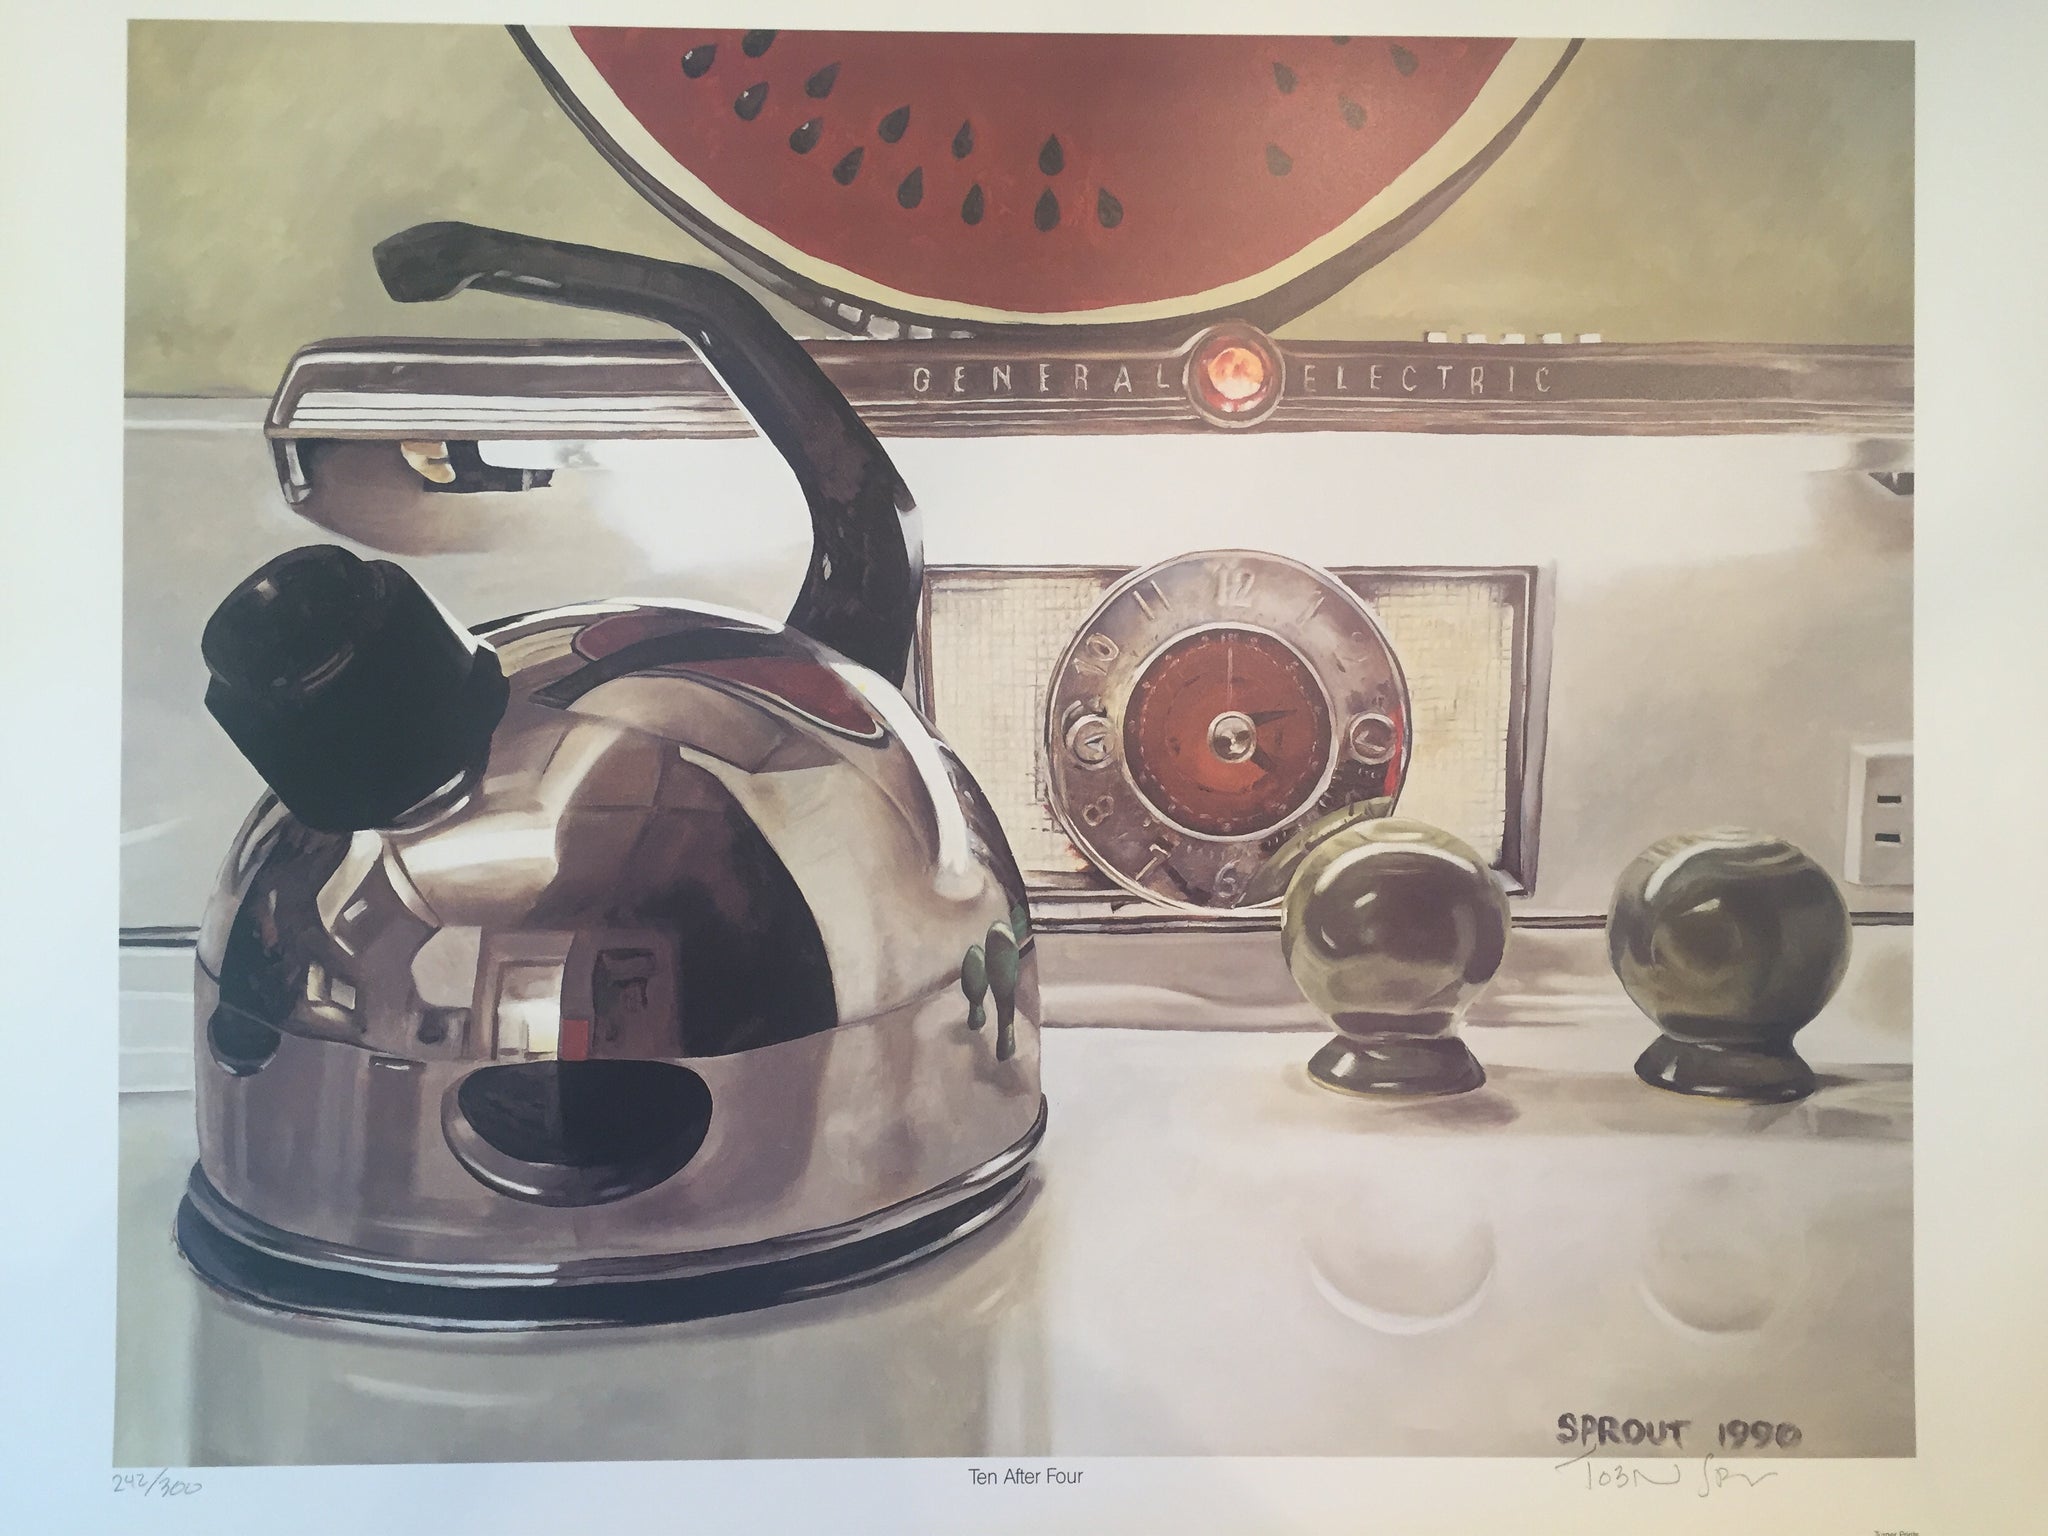 Tobin Sprout "10 after 4" Print. Chrome tea pot on stove with clock